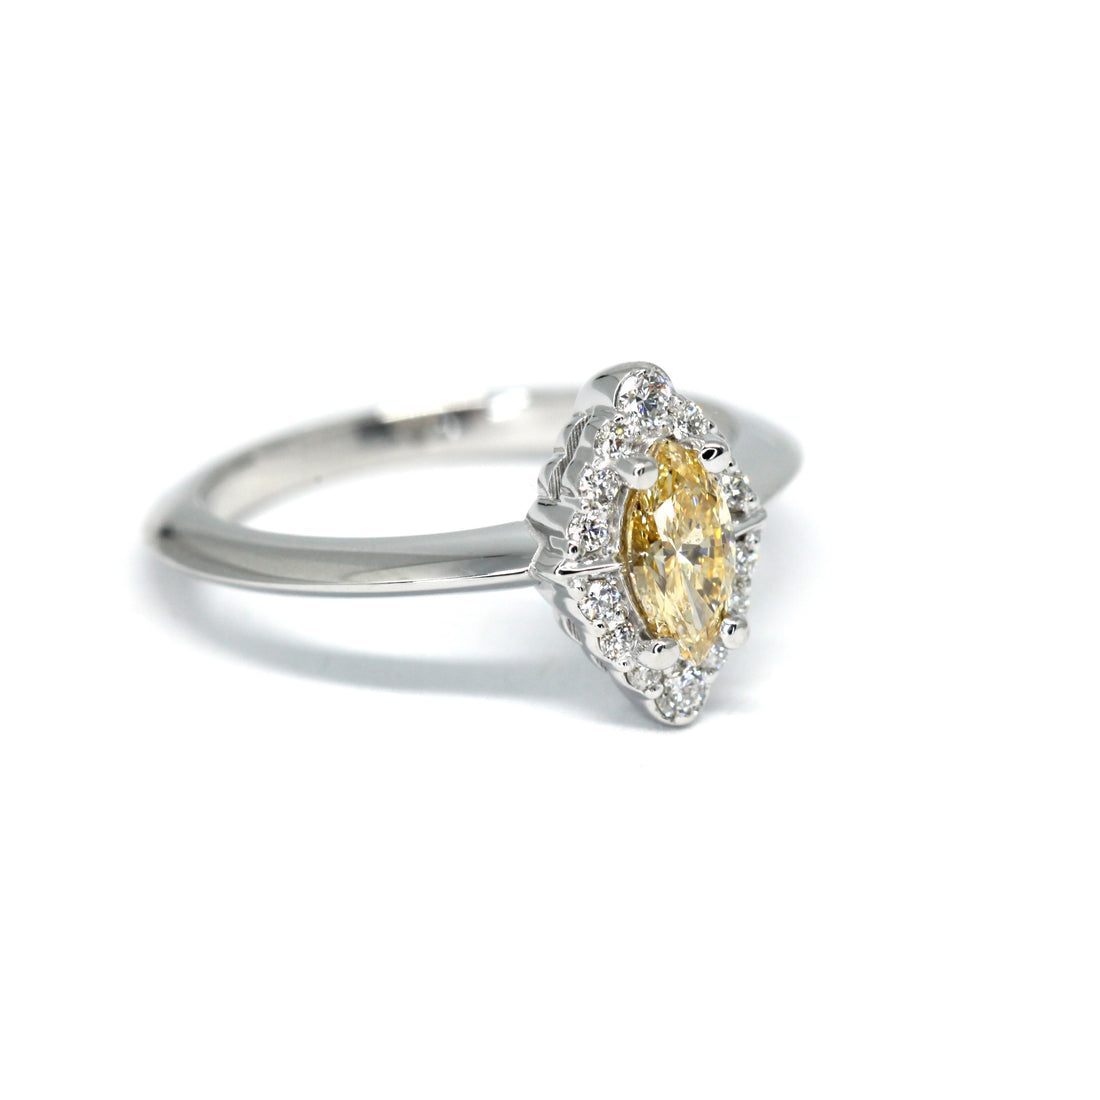 Side view of bridal ring yellow diamond marquise shape yellow gemstone montreal made in canada fine jewelry signature design white round diamond statement halo edgy fancy bridal jewelry color gemstone specialist montreal canada